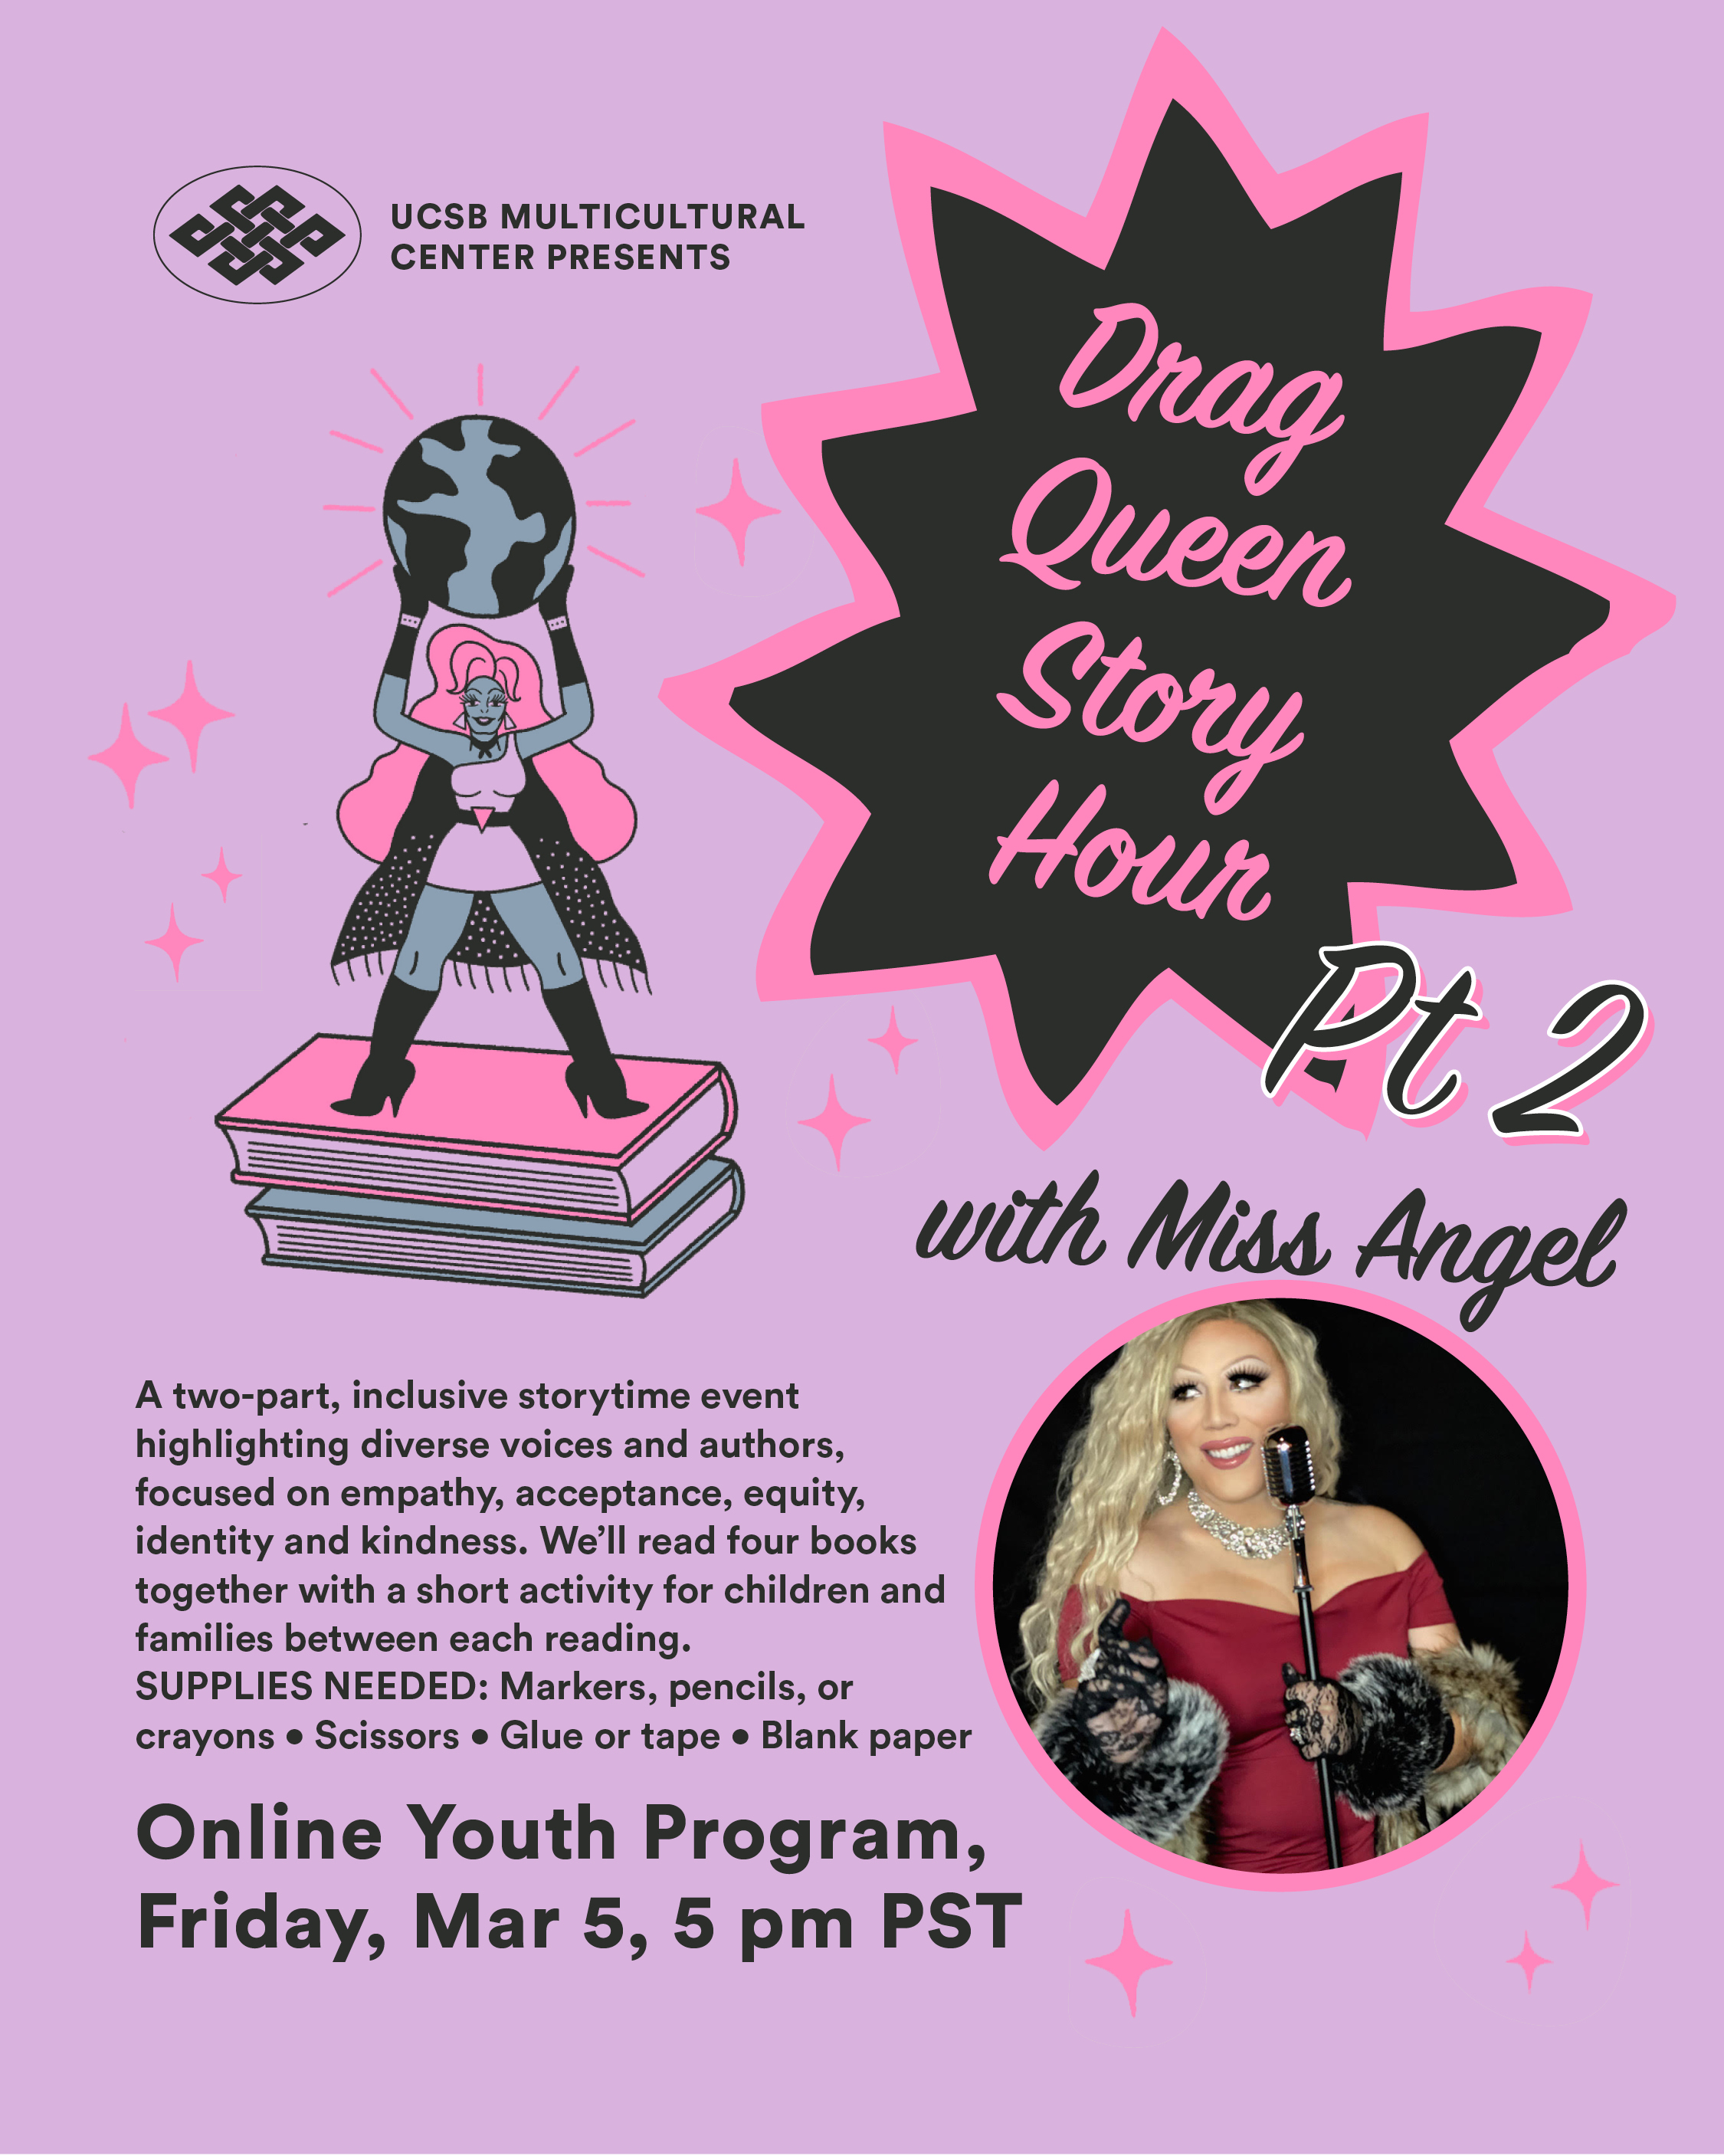 Drag Queen Story Hour with Miss Angel - Part 2